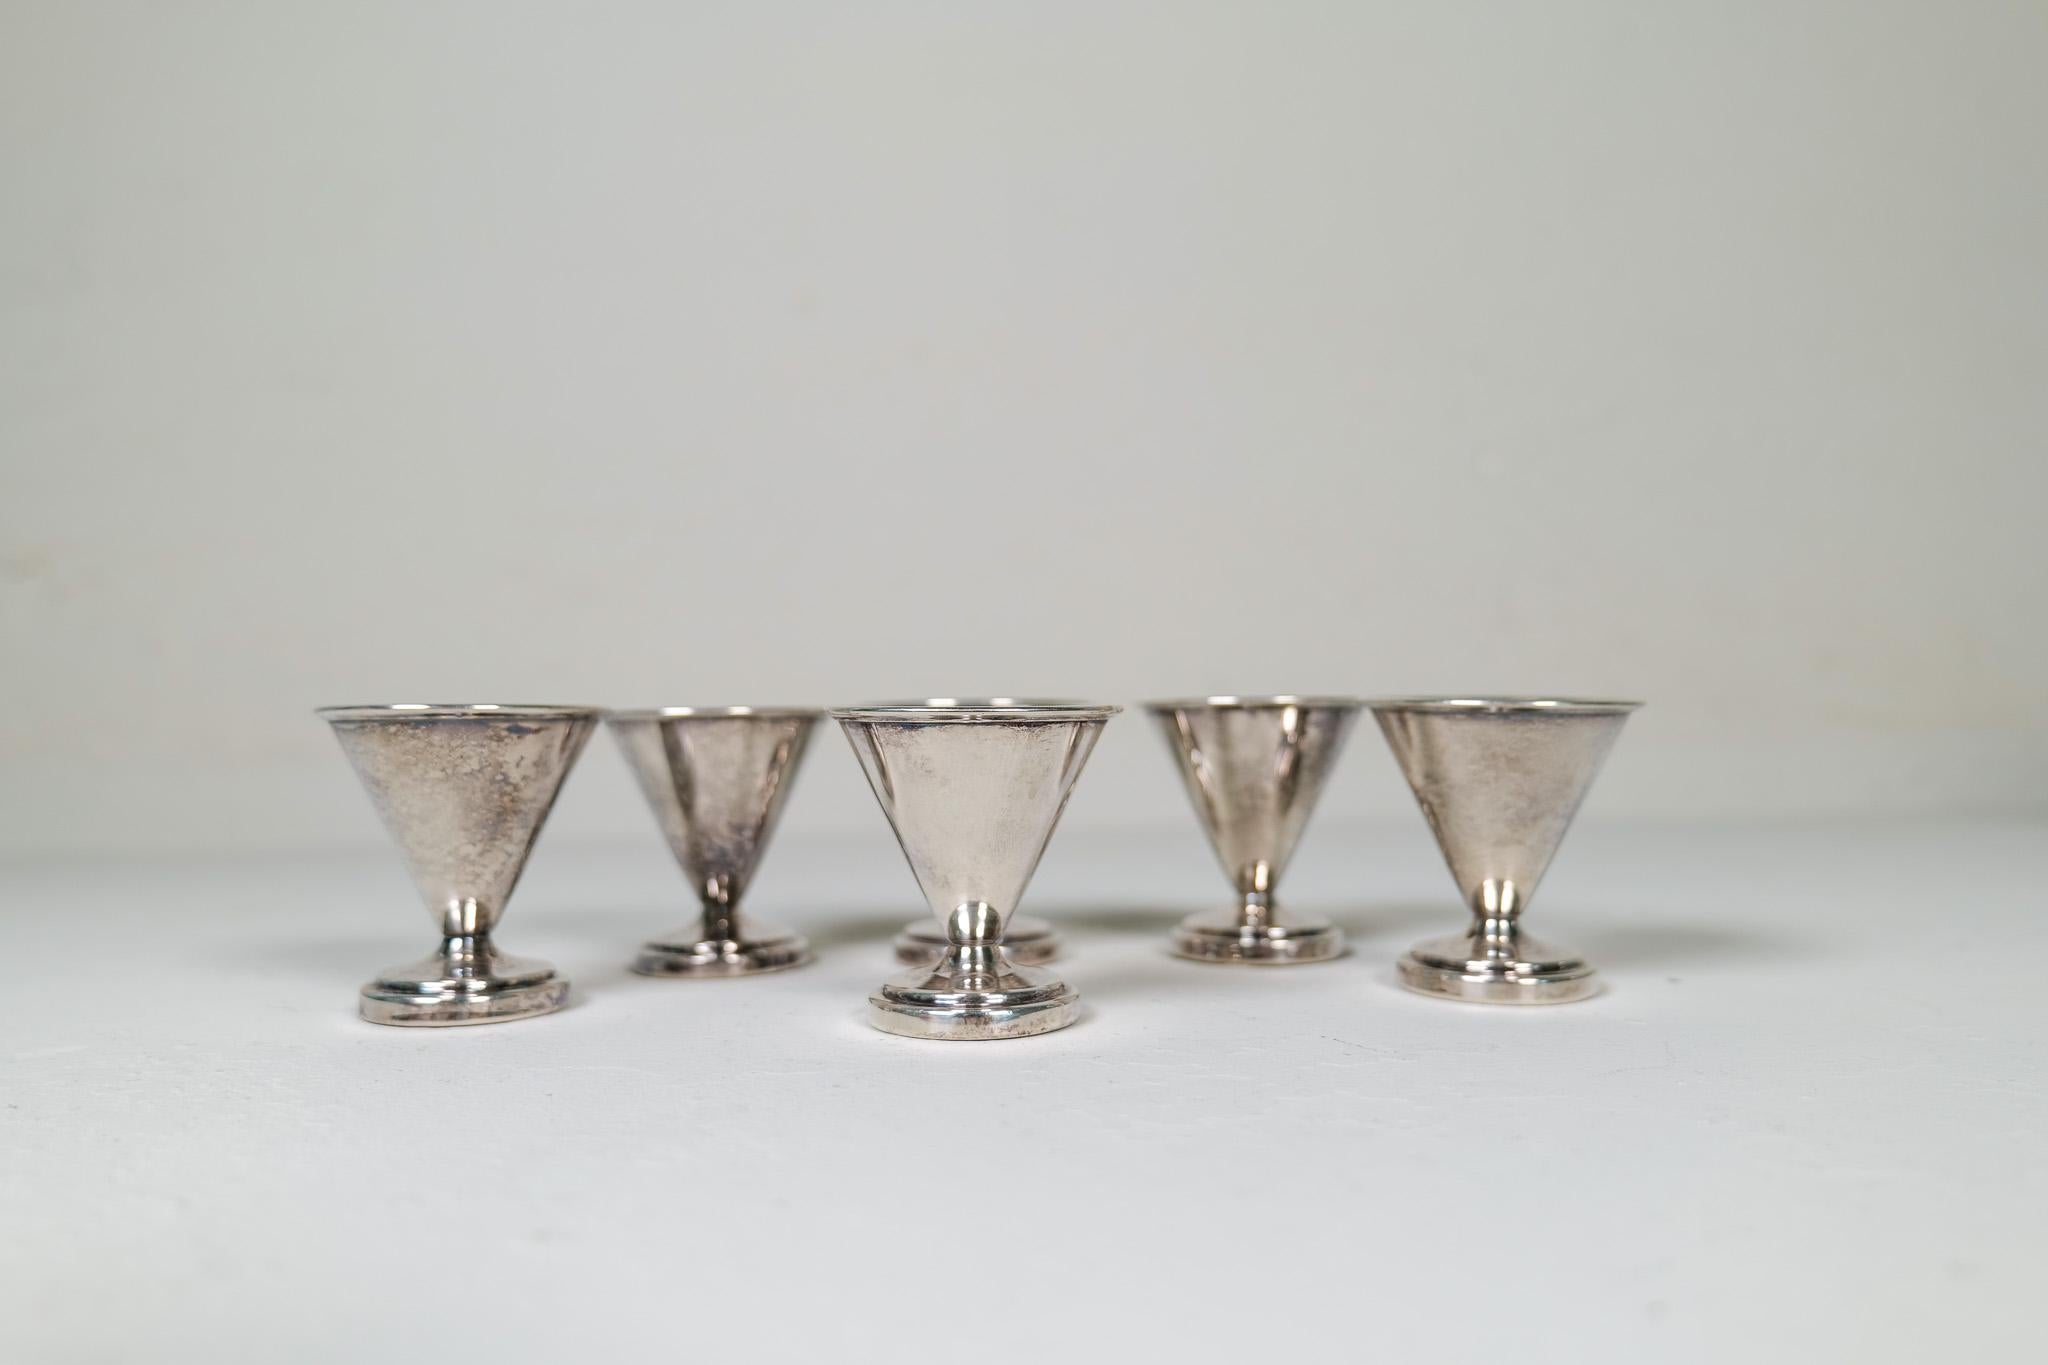 Art Deco Cocktail Shaker with 6 Small Glasses by Folke Arström, Sweden For Sale 6